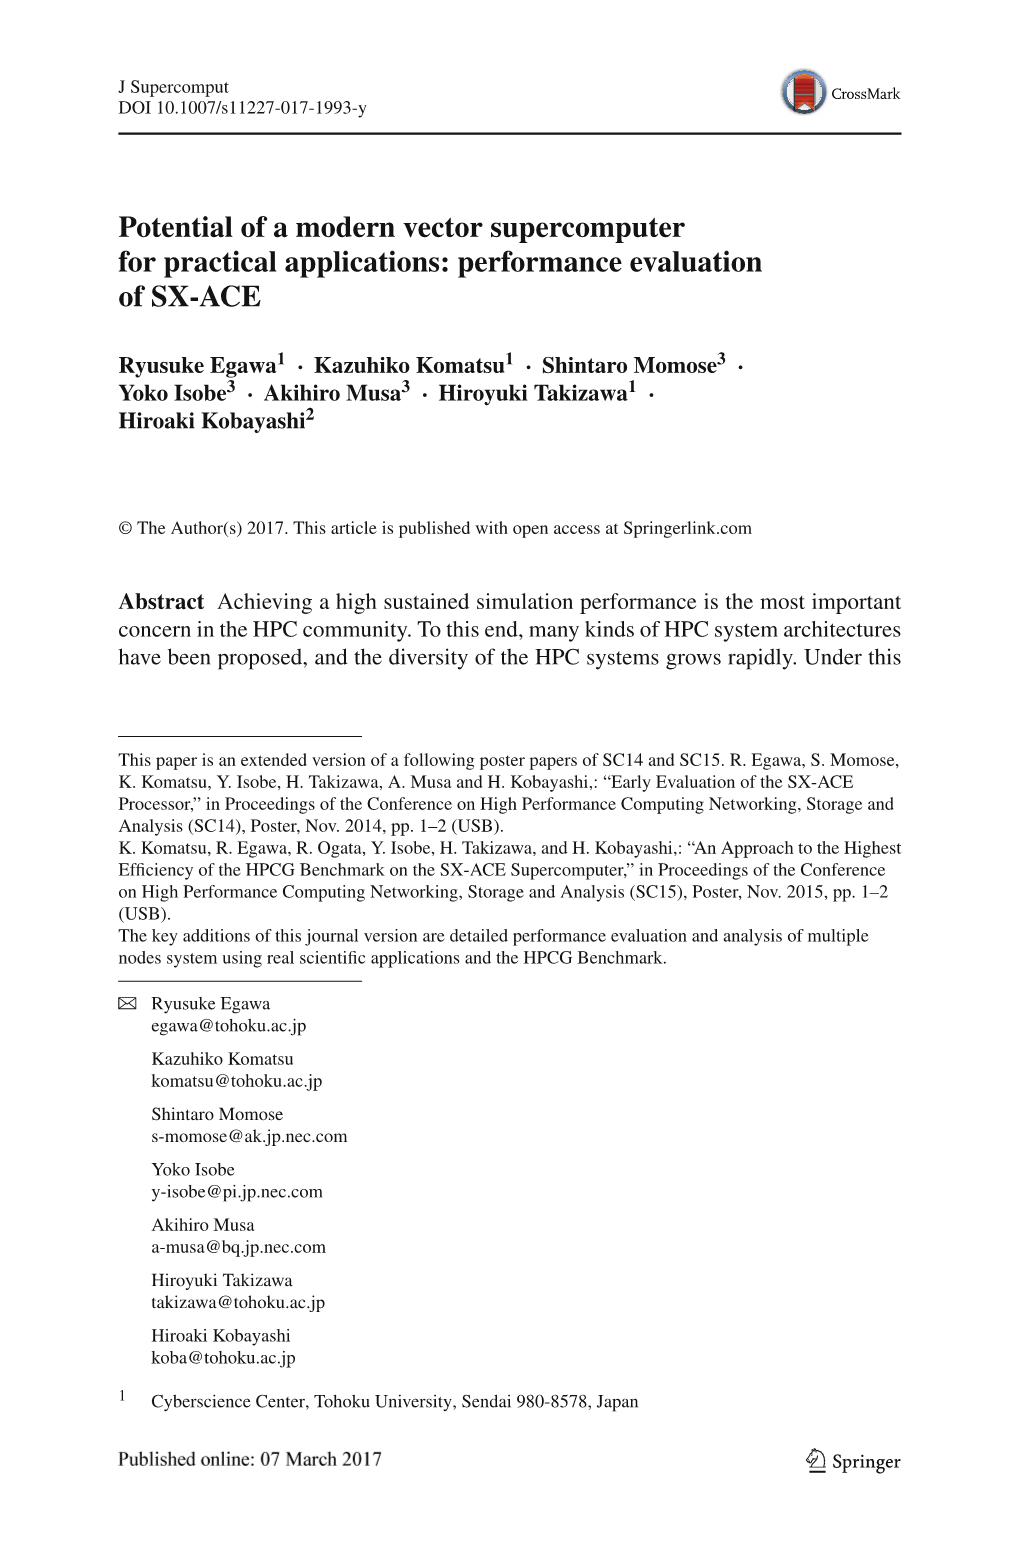 Potential of a Modern Vector Supercomputer for Practical Applications: Performance Evaluation of SX-ACE